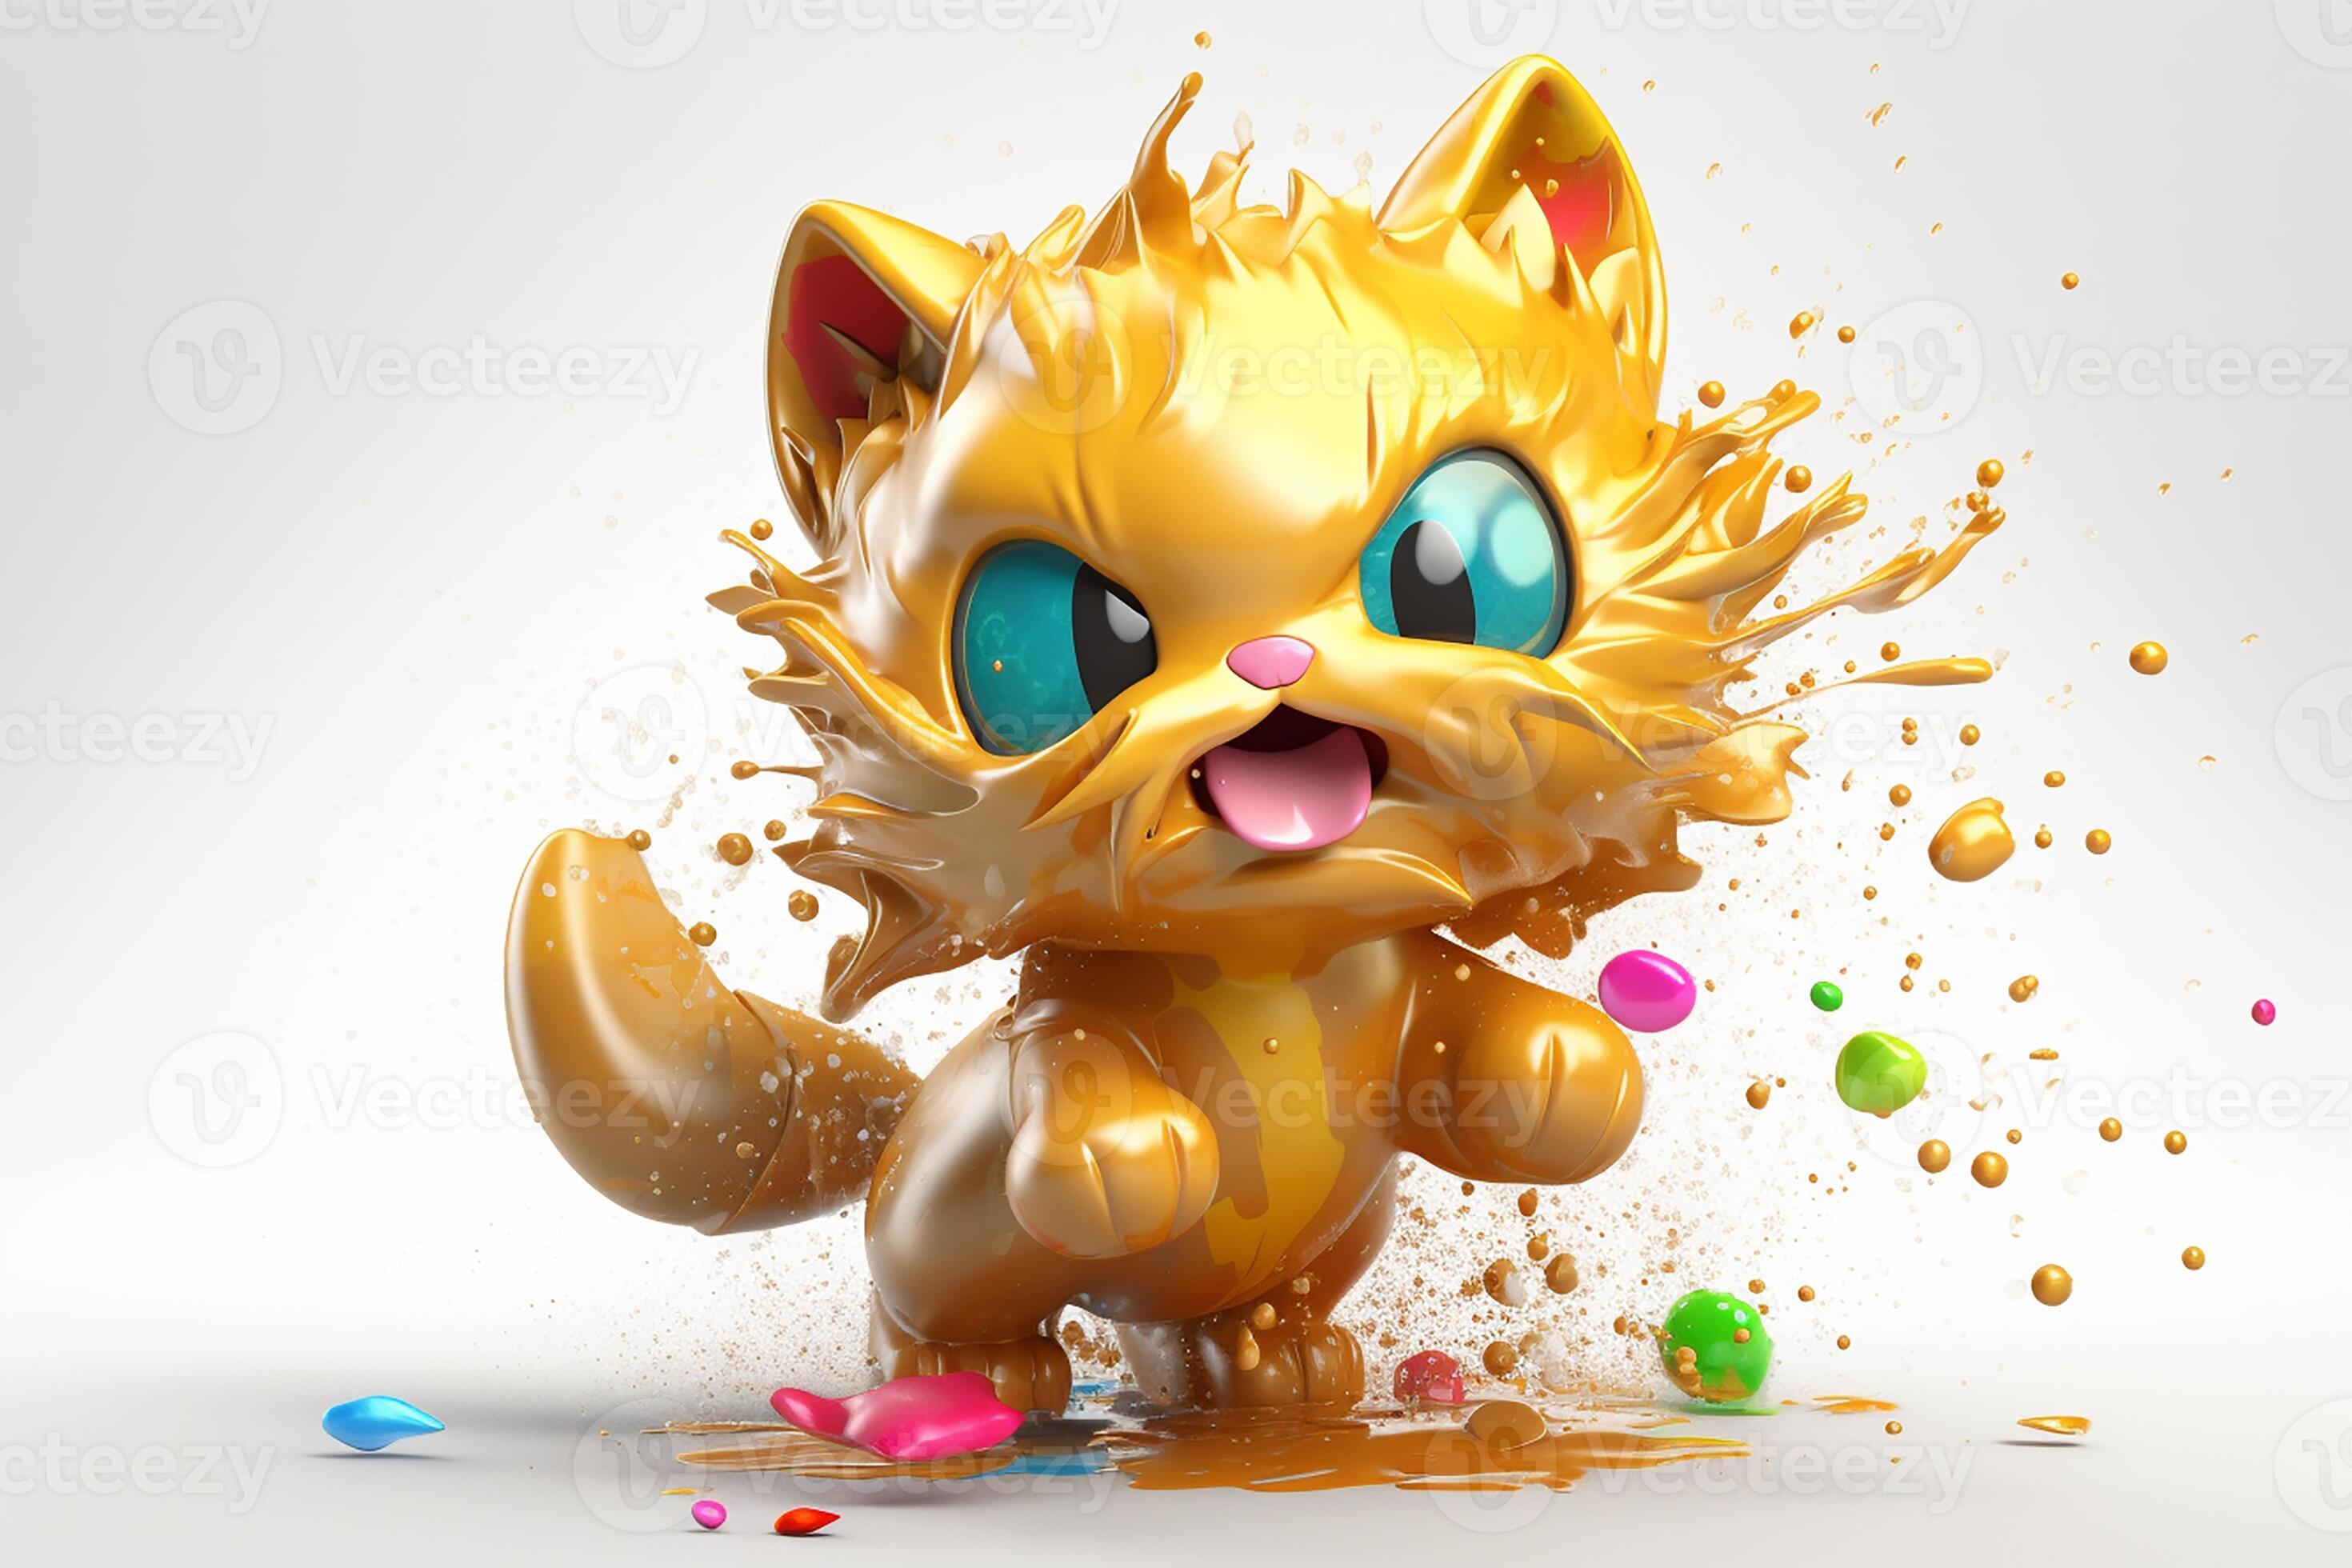 1,308 Angry Wet Cat Images, Stock Photos, 3D objects, & Vectors